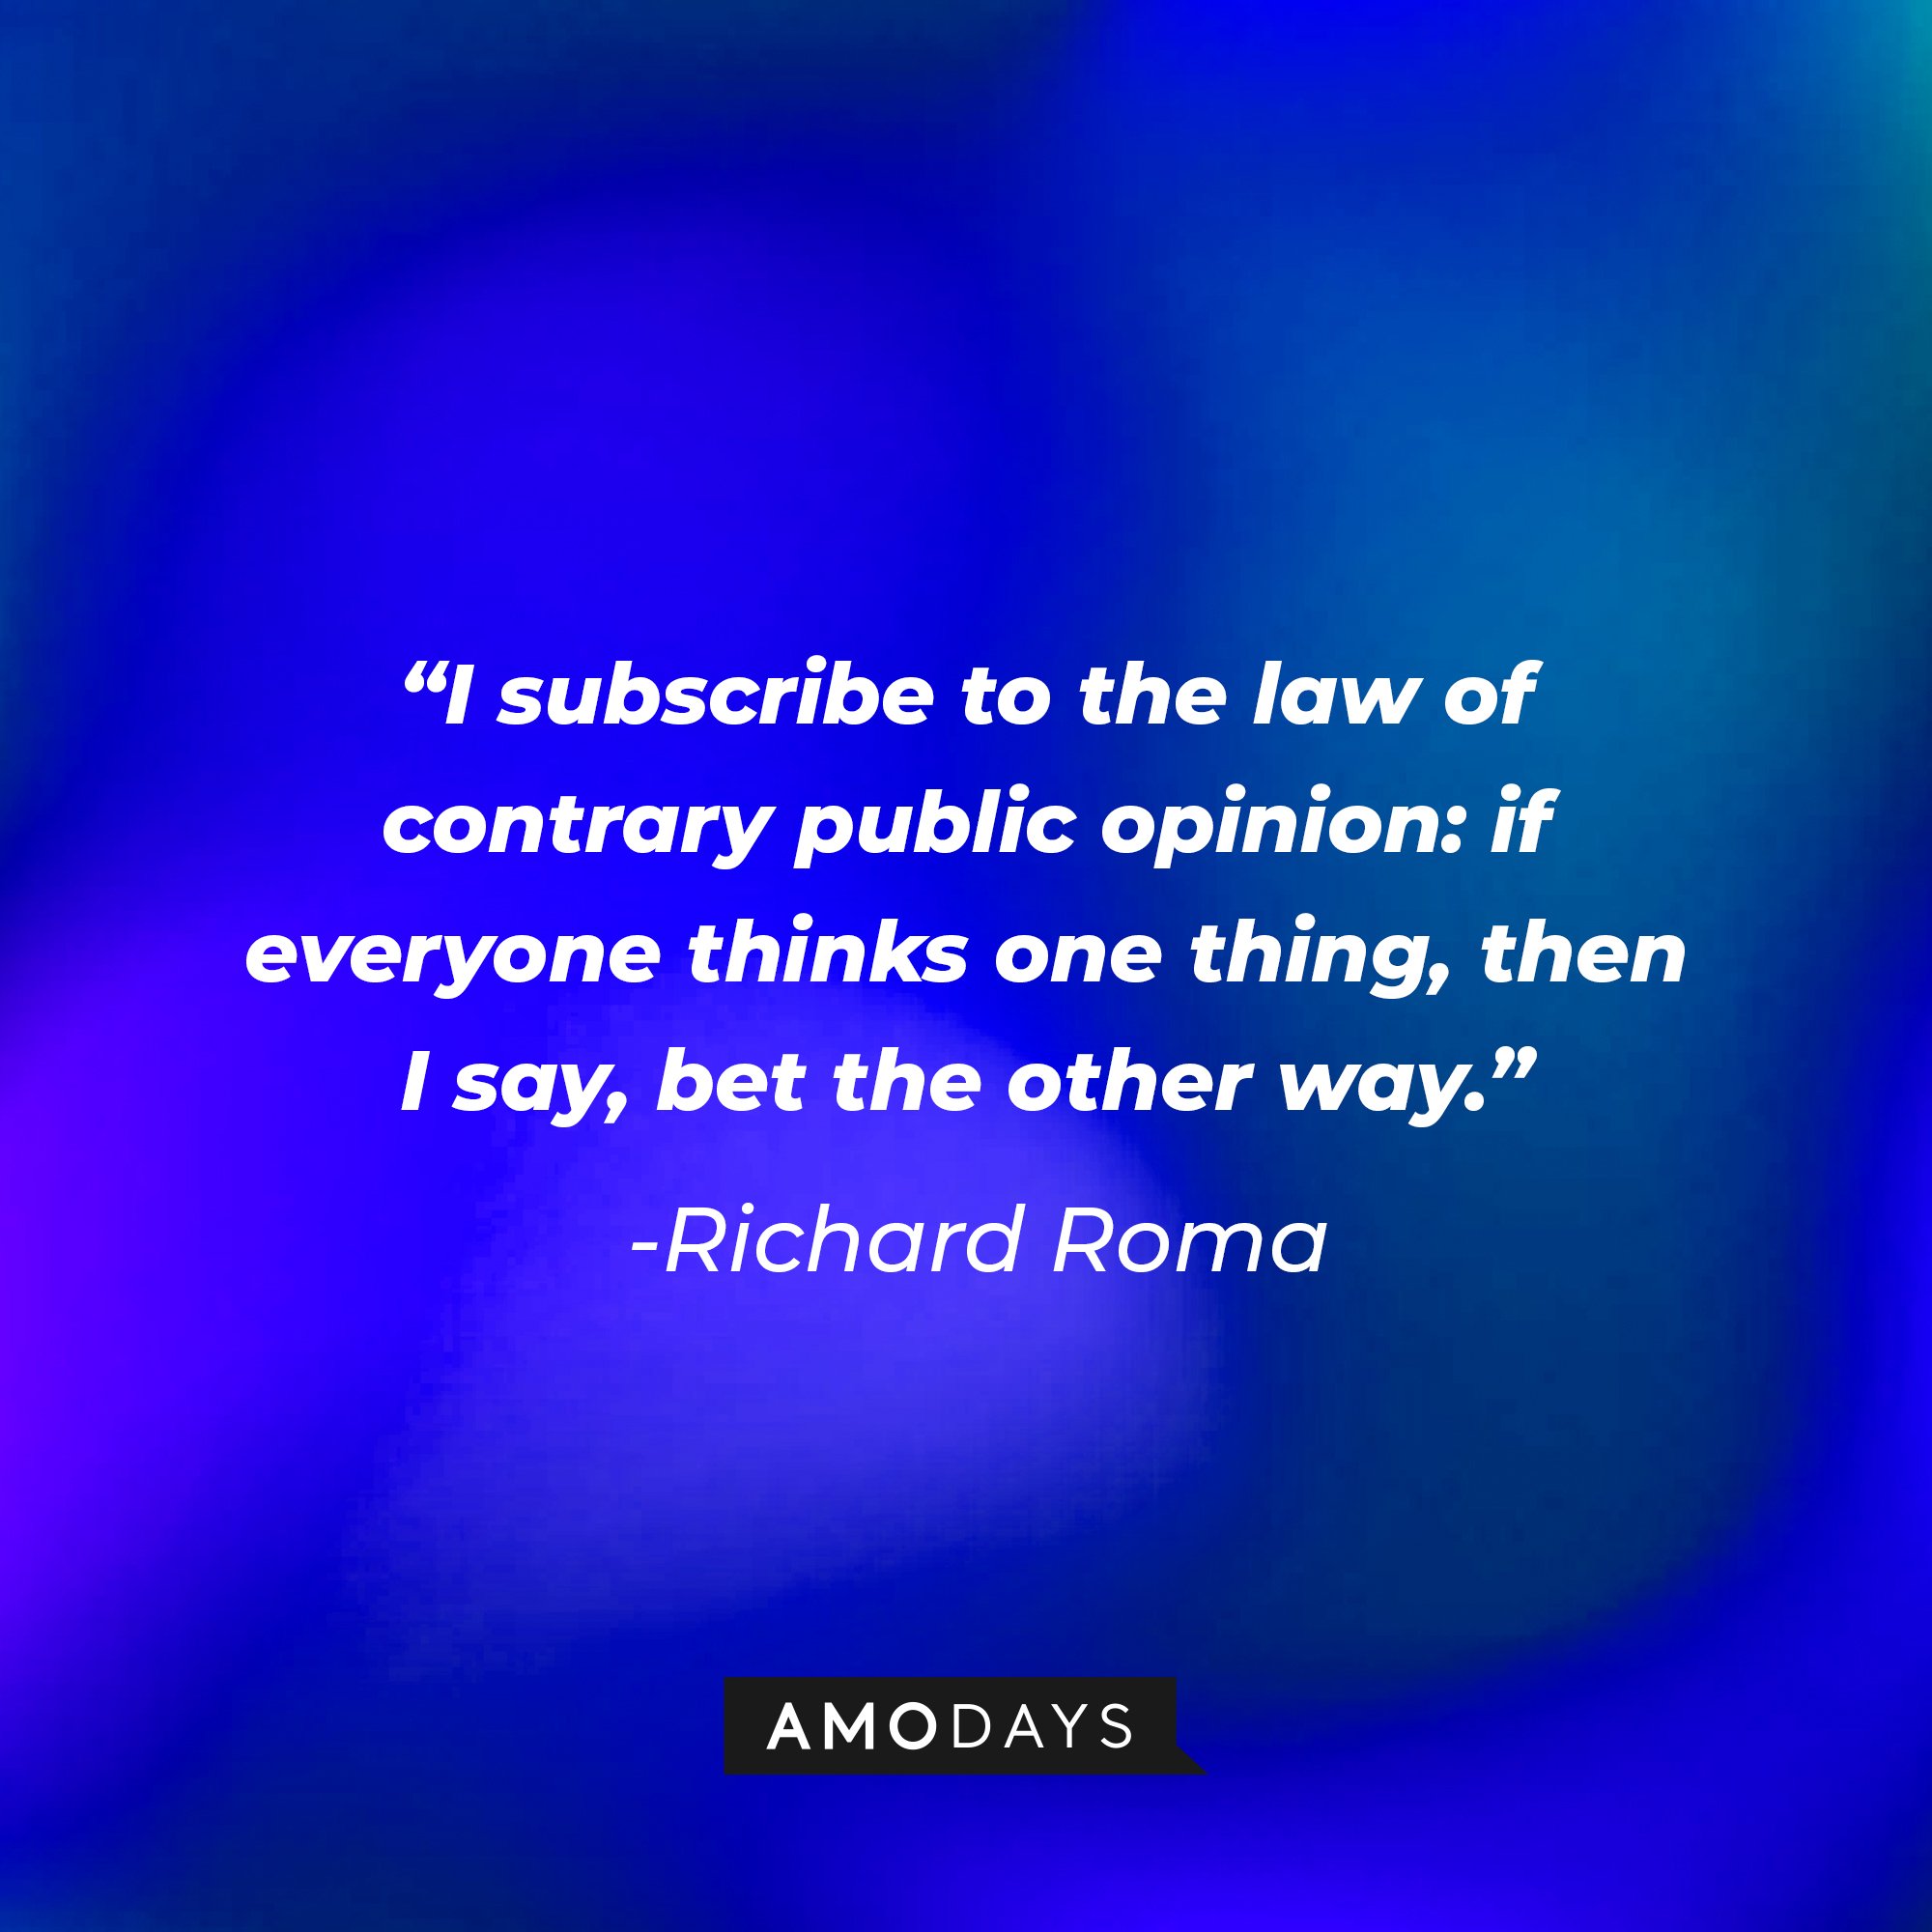 Richard Roma's quote: "I subscribe to the law of contrary public opinion: if everyone thinks one thing, then I say, bet the other way." | Image: AmoDays